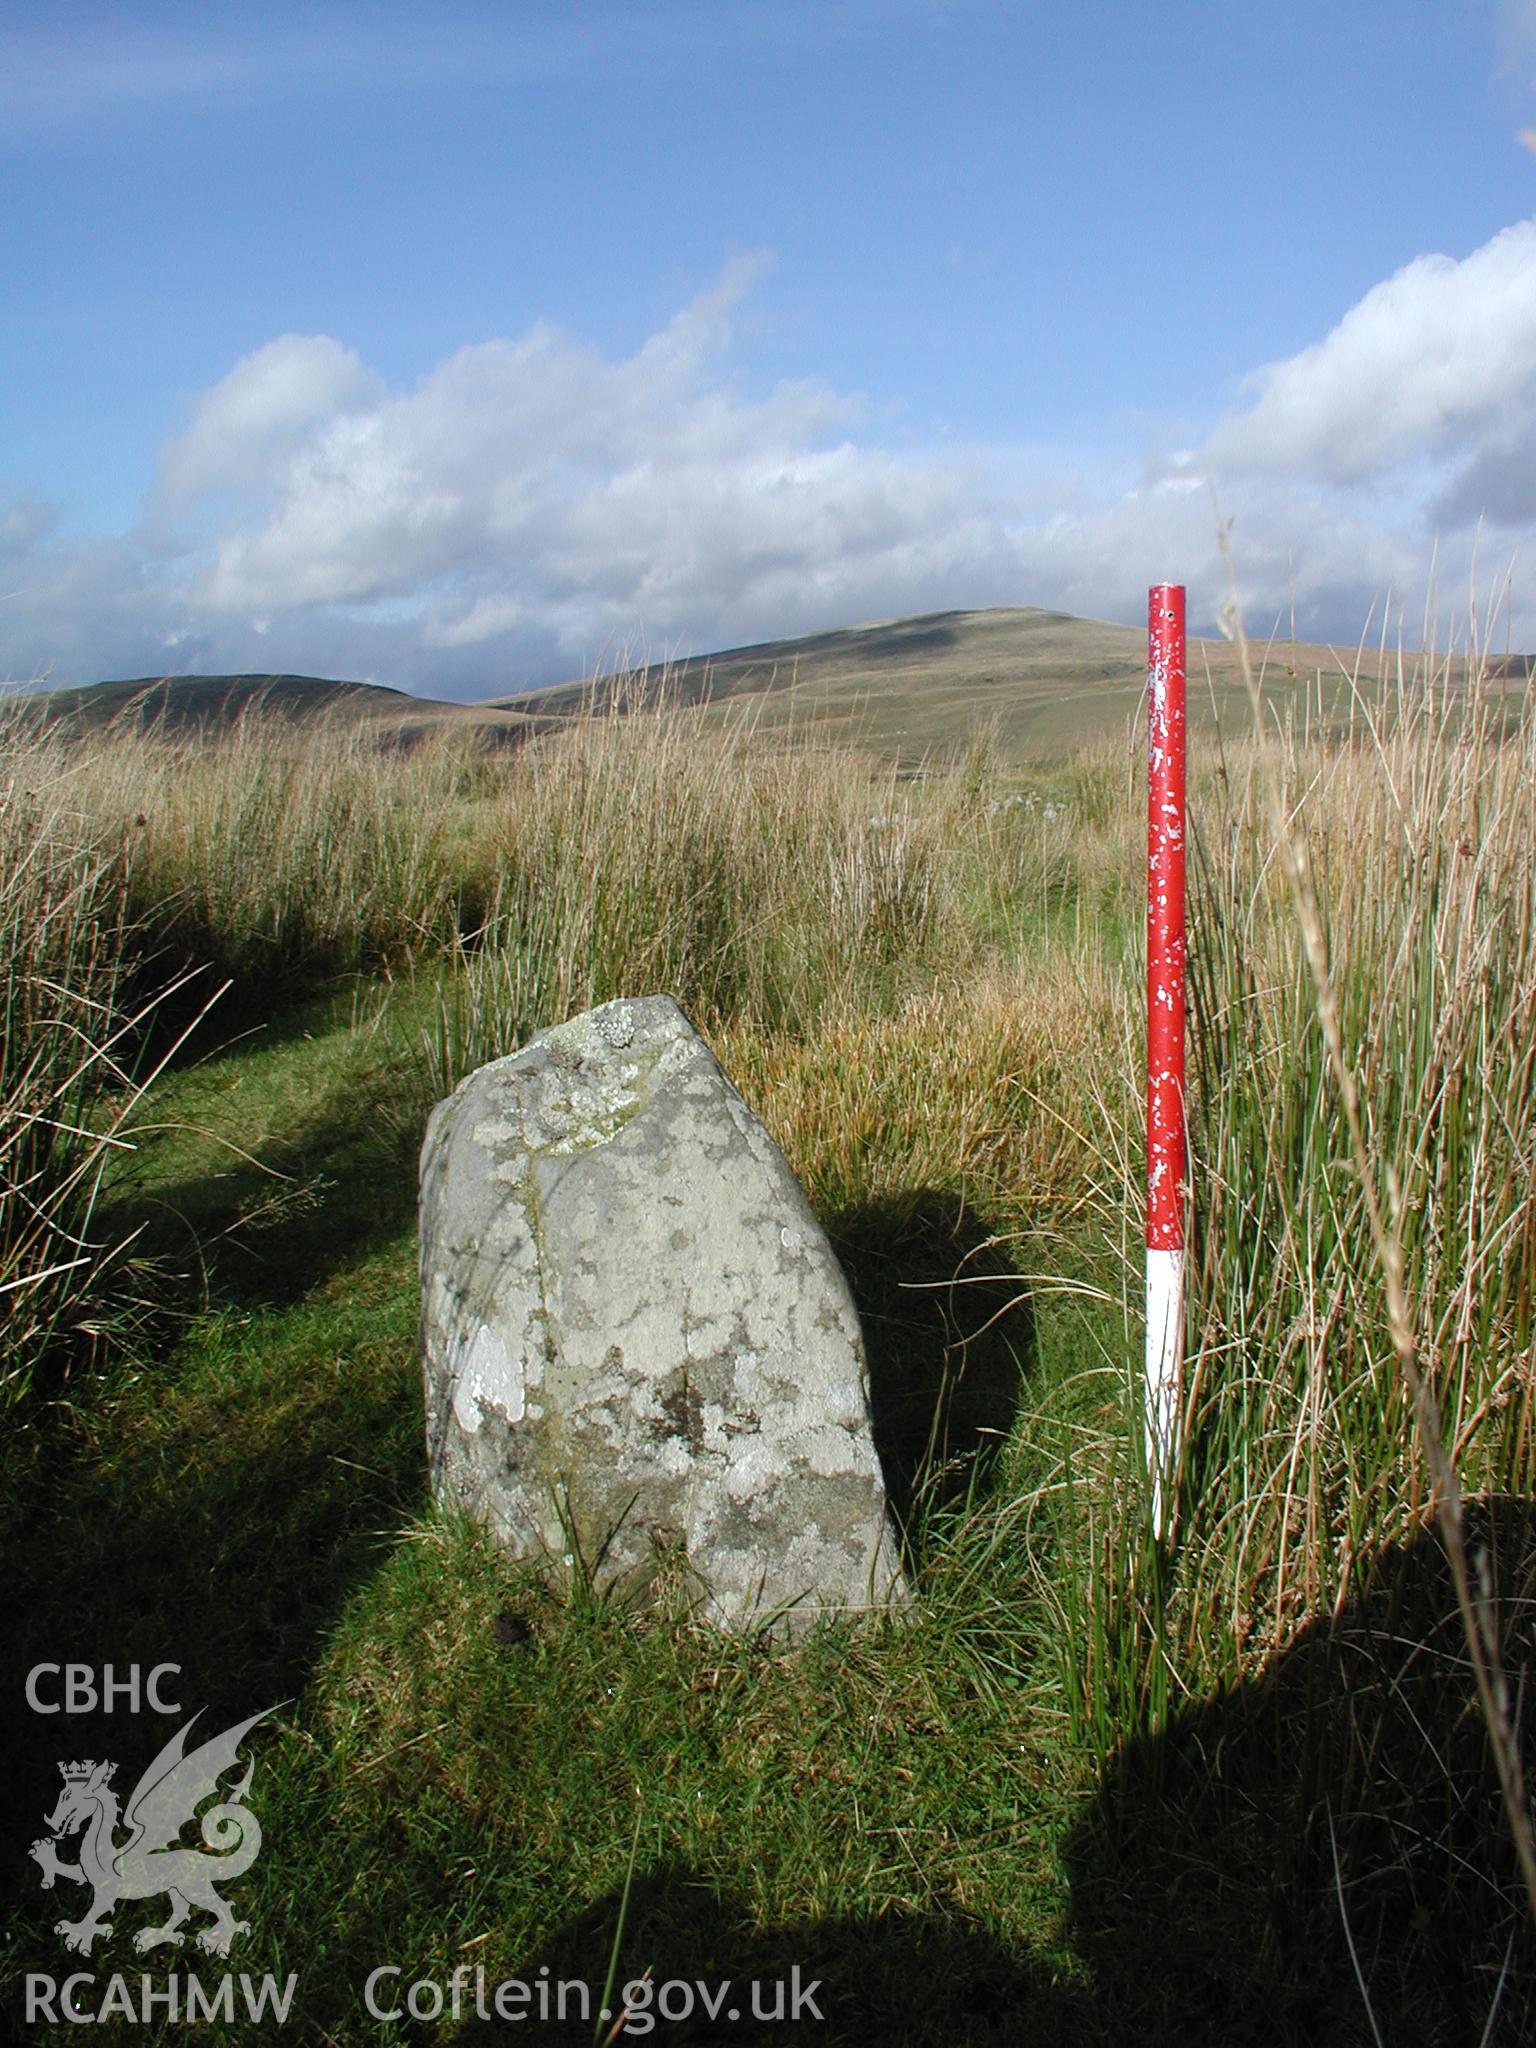 Photograph of Garn Lwyd Standing Stone taken on 18/10/2004 by R.S. Jones during an Upland Survey undertaken by Cambrian Archaeological Projects.